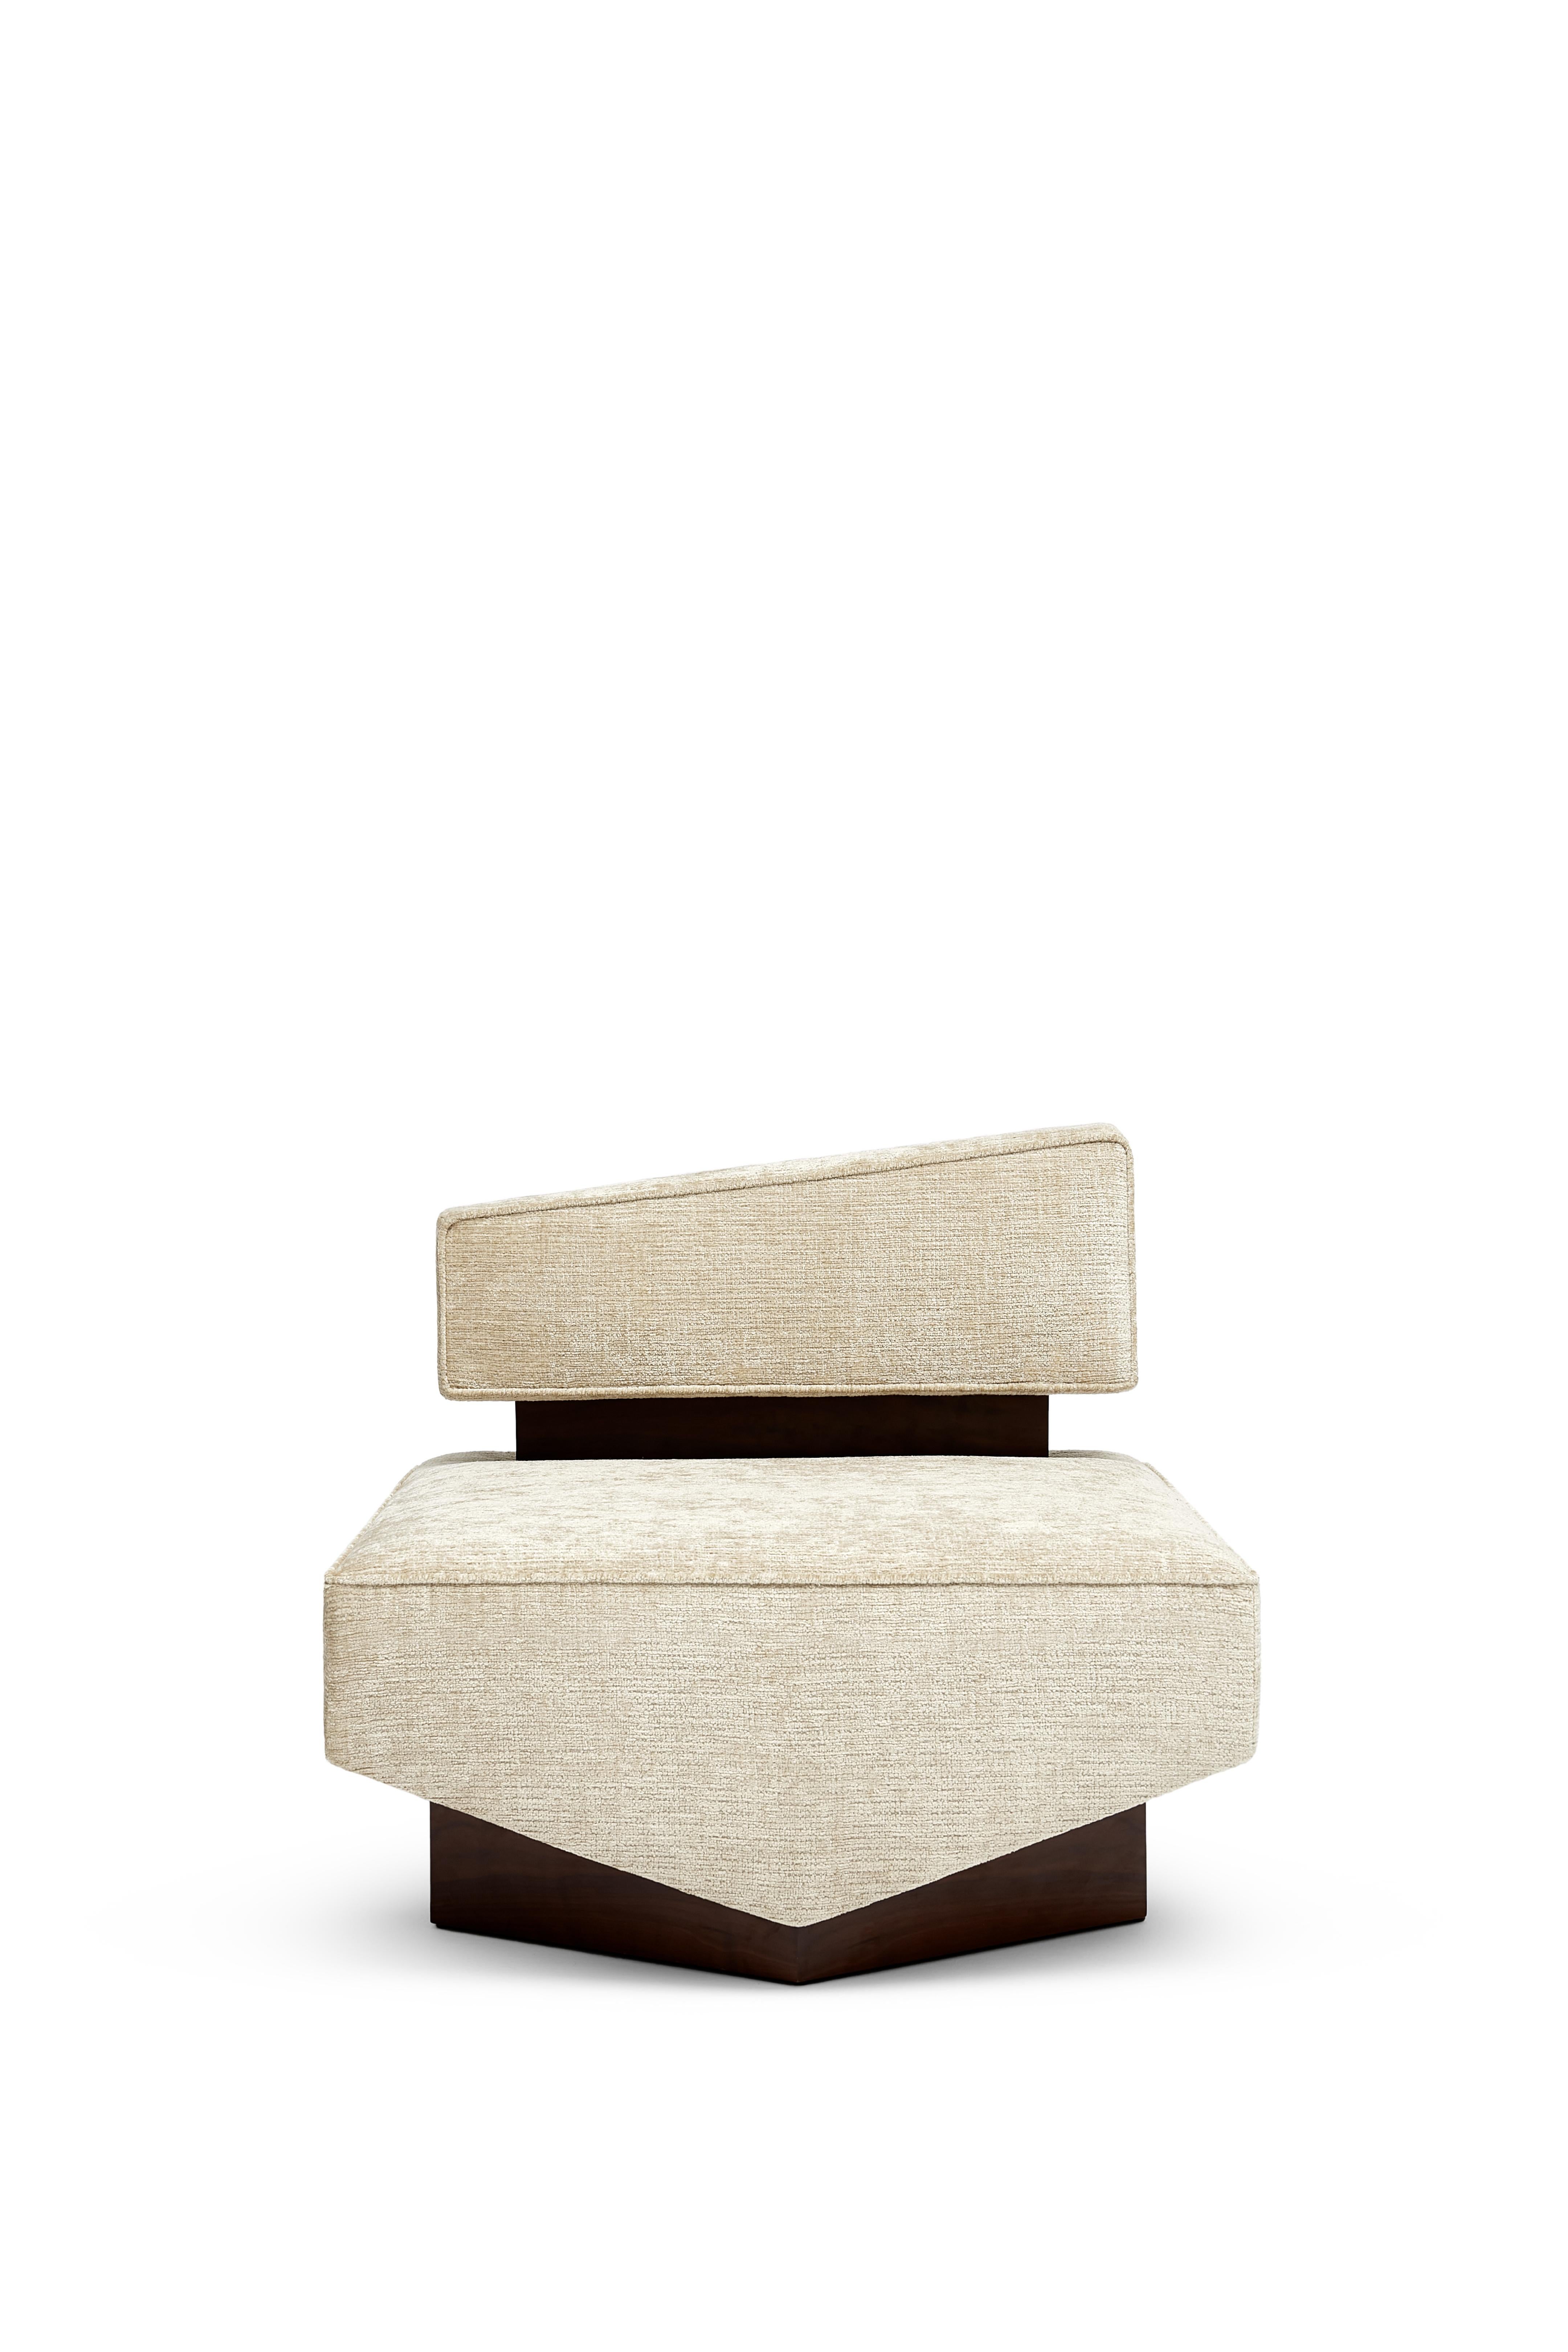 Divergent armchair by Marta Delgado Studio

Fabric: Vintage 
Color: White (more colors available)
Wood: American Walnut Veener

Dimensions:
Width: 31.5” 80 cm 
Depth: 32.7” 83 cm 
Height: 29.1” 74 cm
Seat height: 15.7” 40 cm

Marta